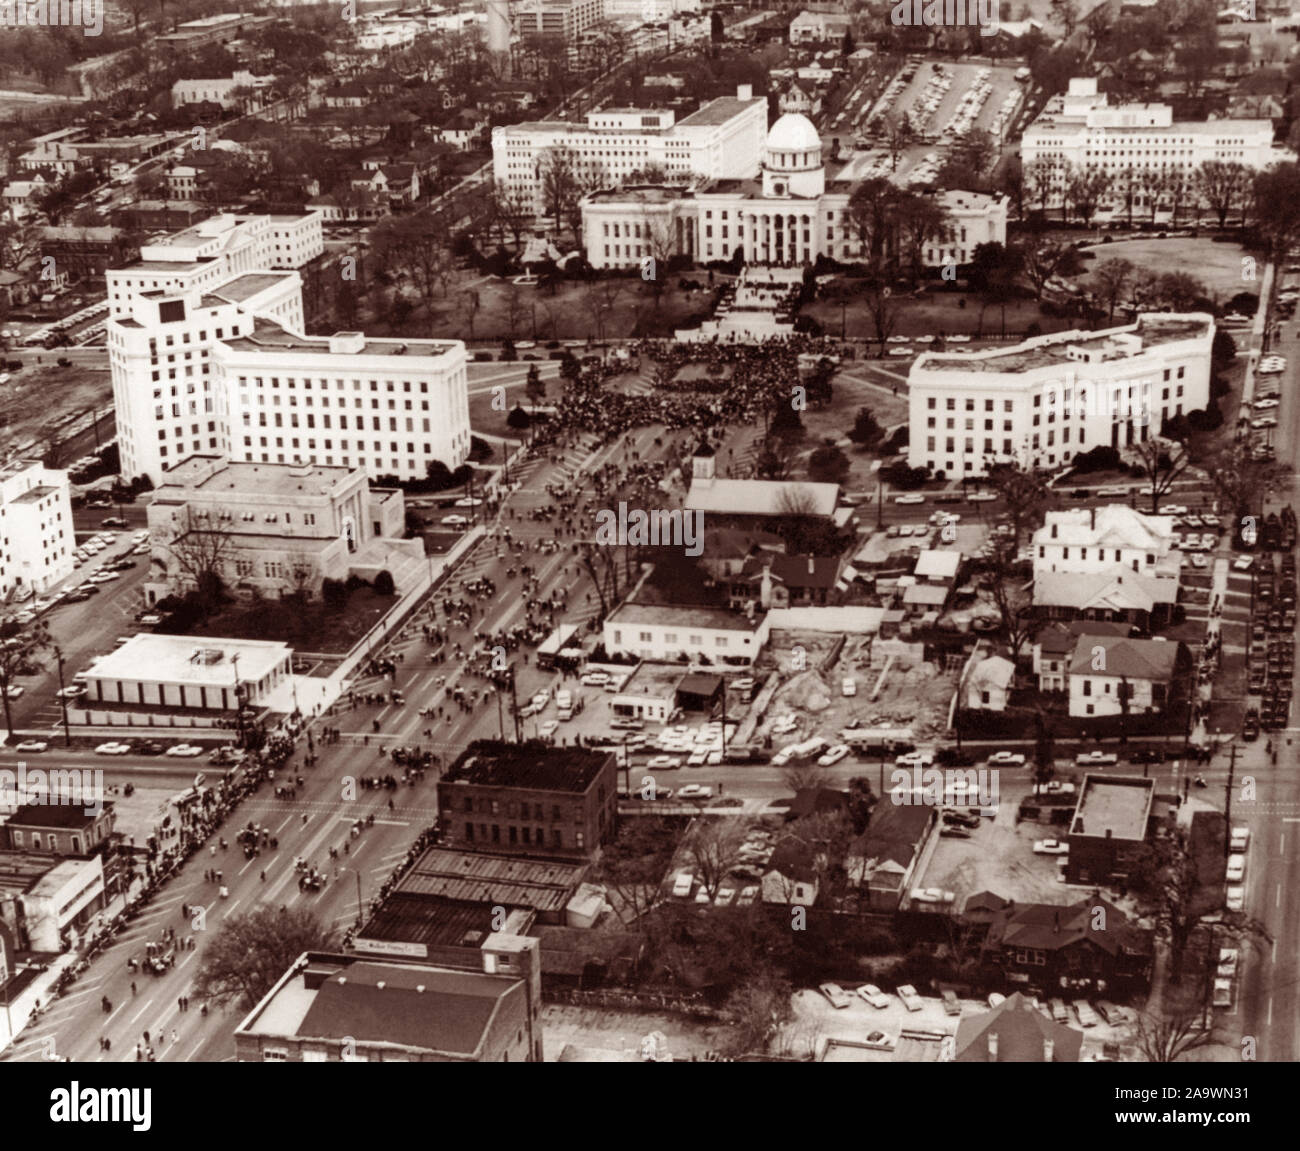 Aerial photo of the Selma to Montgomery civil rights march reaching the Alabama Capitol building on March 25, 1965. (USA) Stock Photo